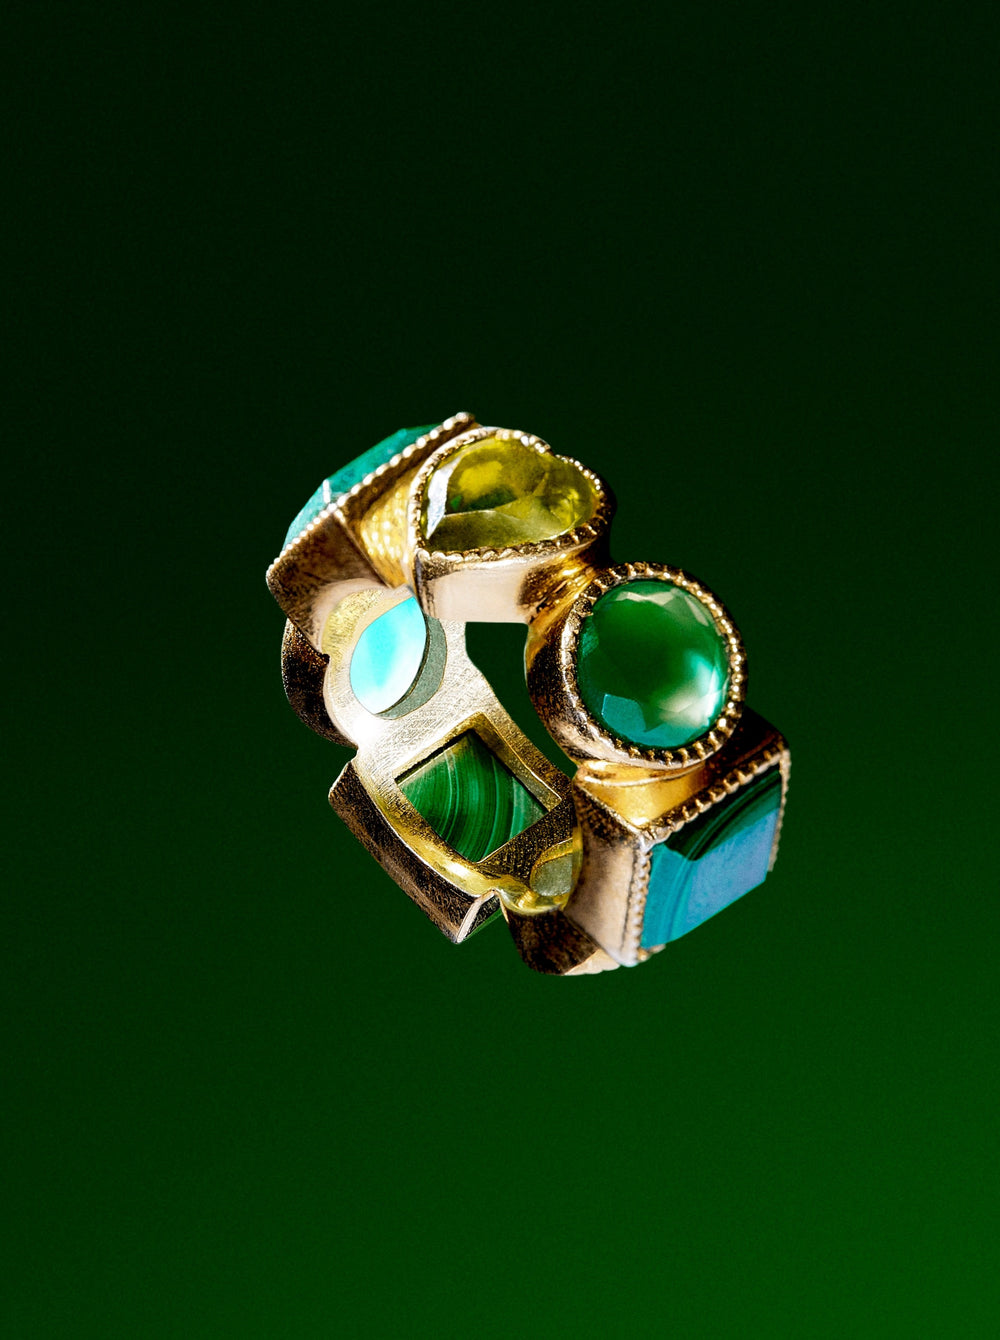 The Green Shape Ring in Yellow Gold